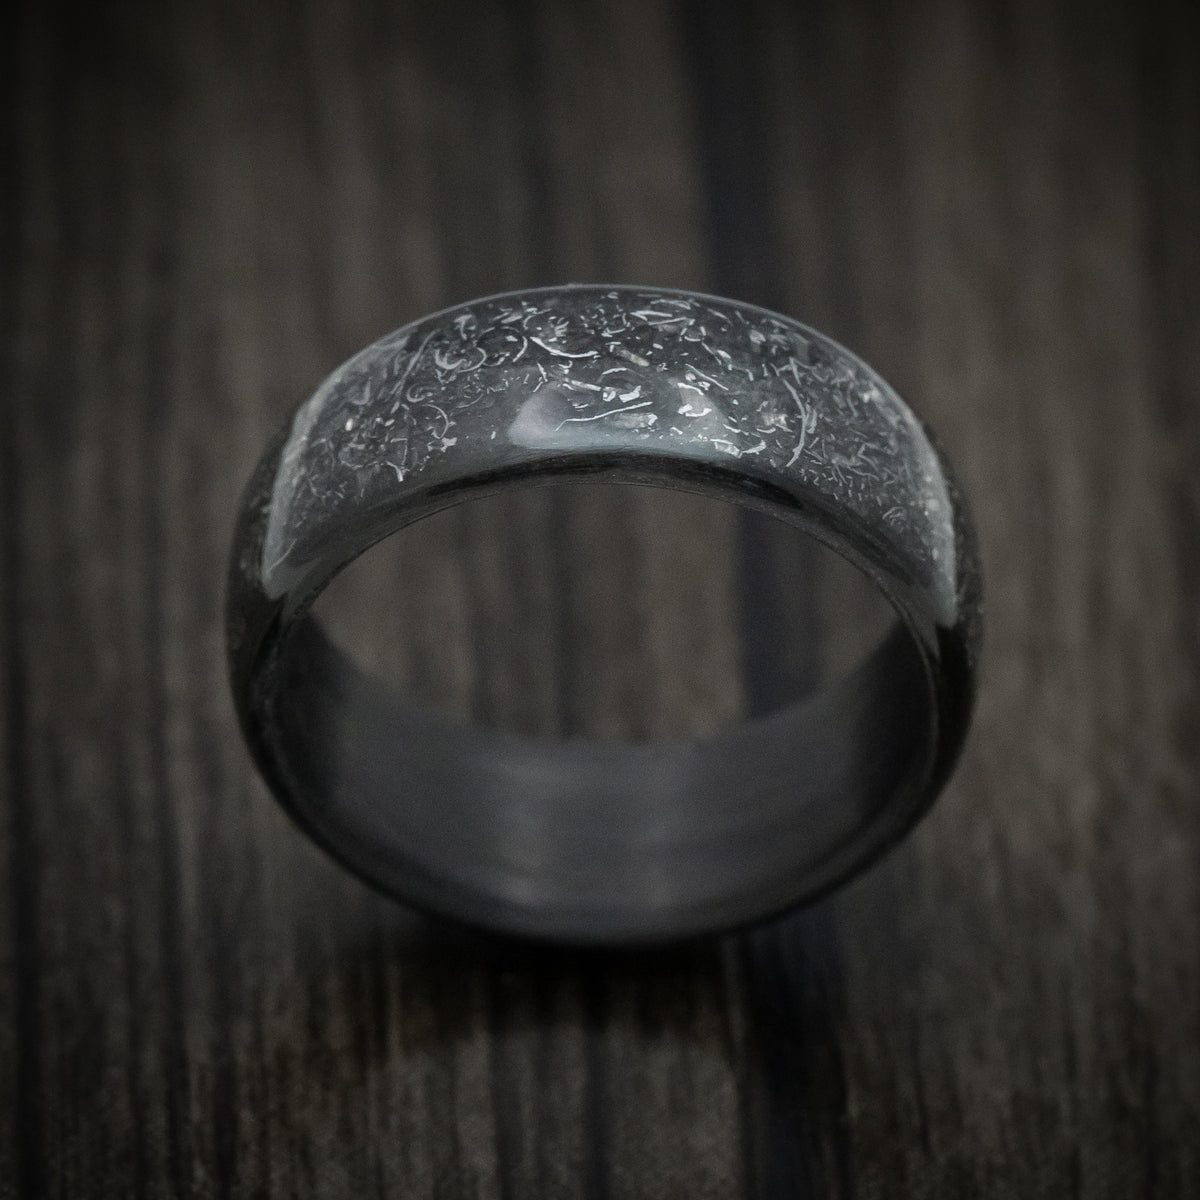 Carbon Fiber Men's Ring with Galaxy Glow Inlay Meteorite Band ...